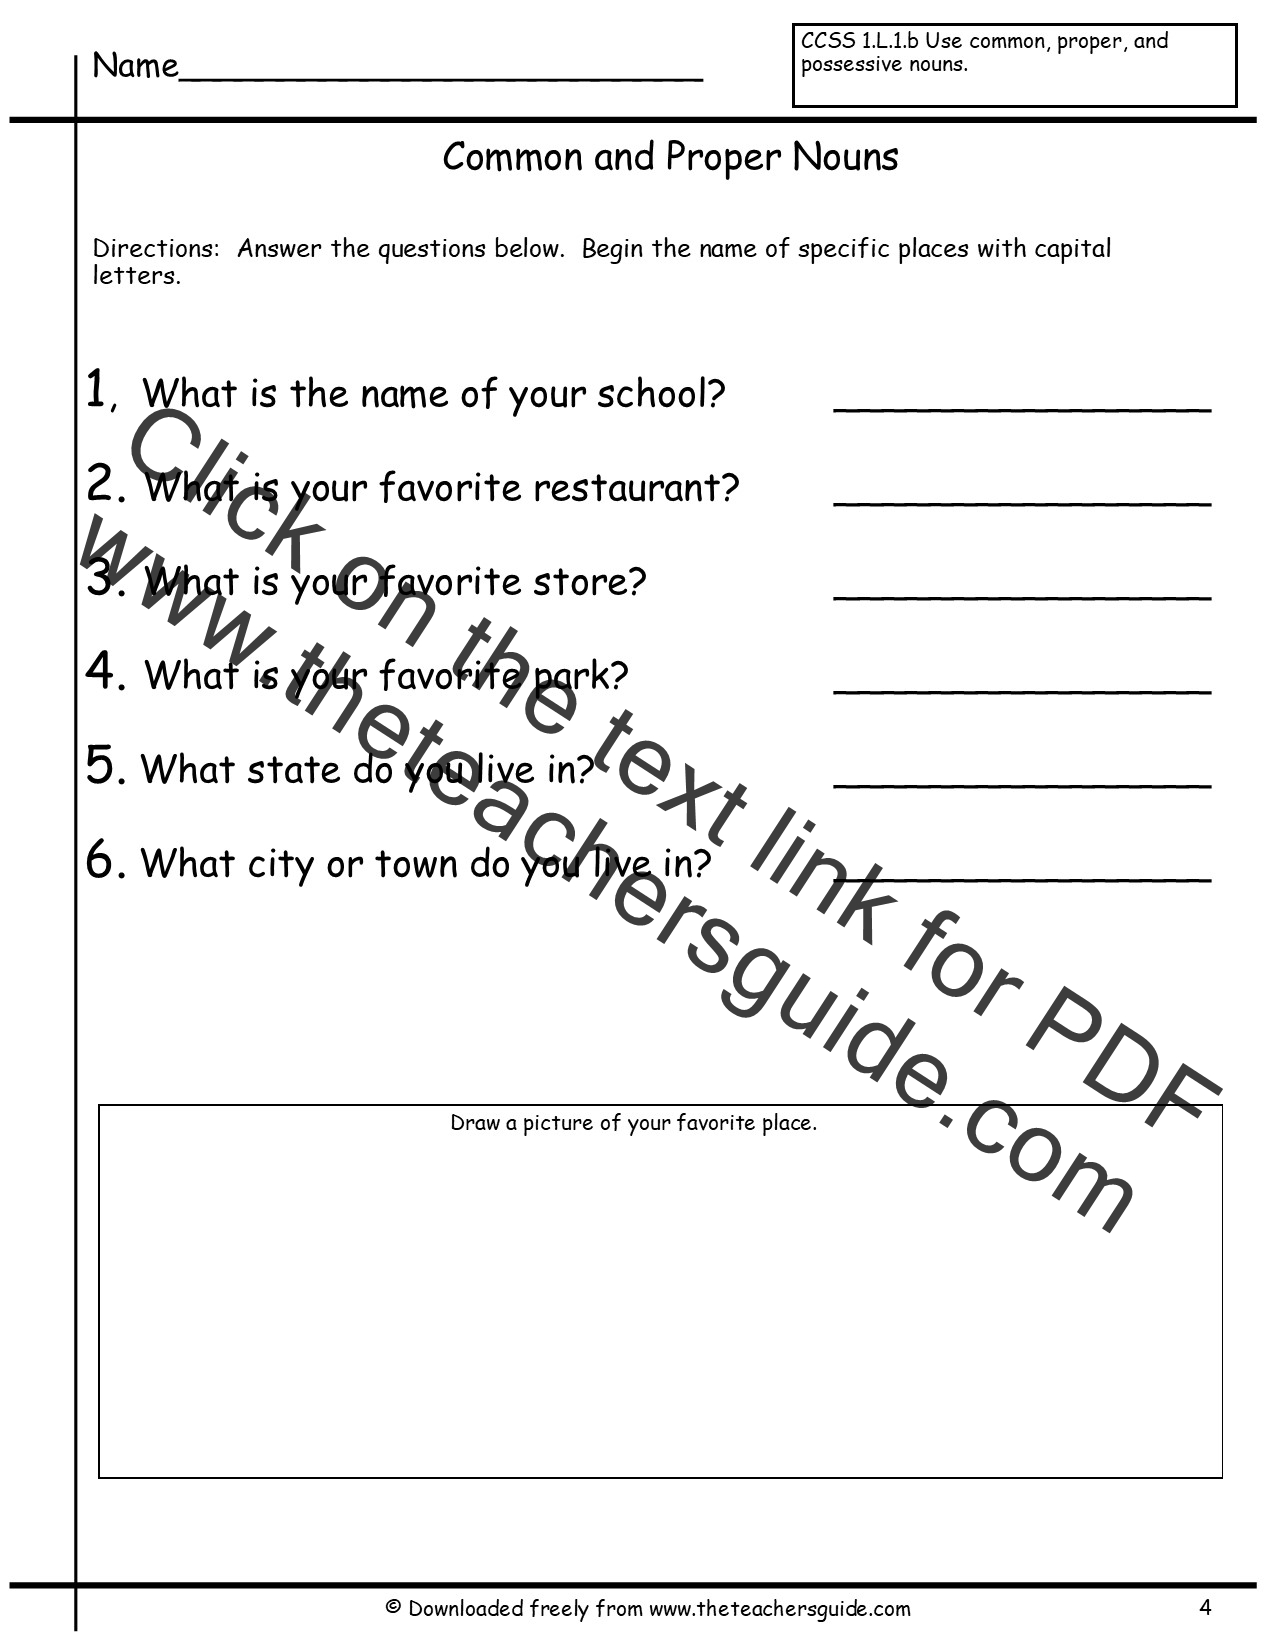 common-and-proper-nouns-worksheets-from-the-teacher-s-guide